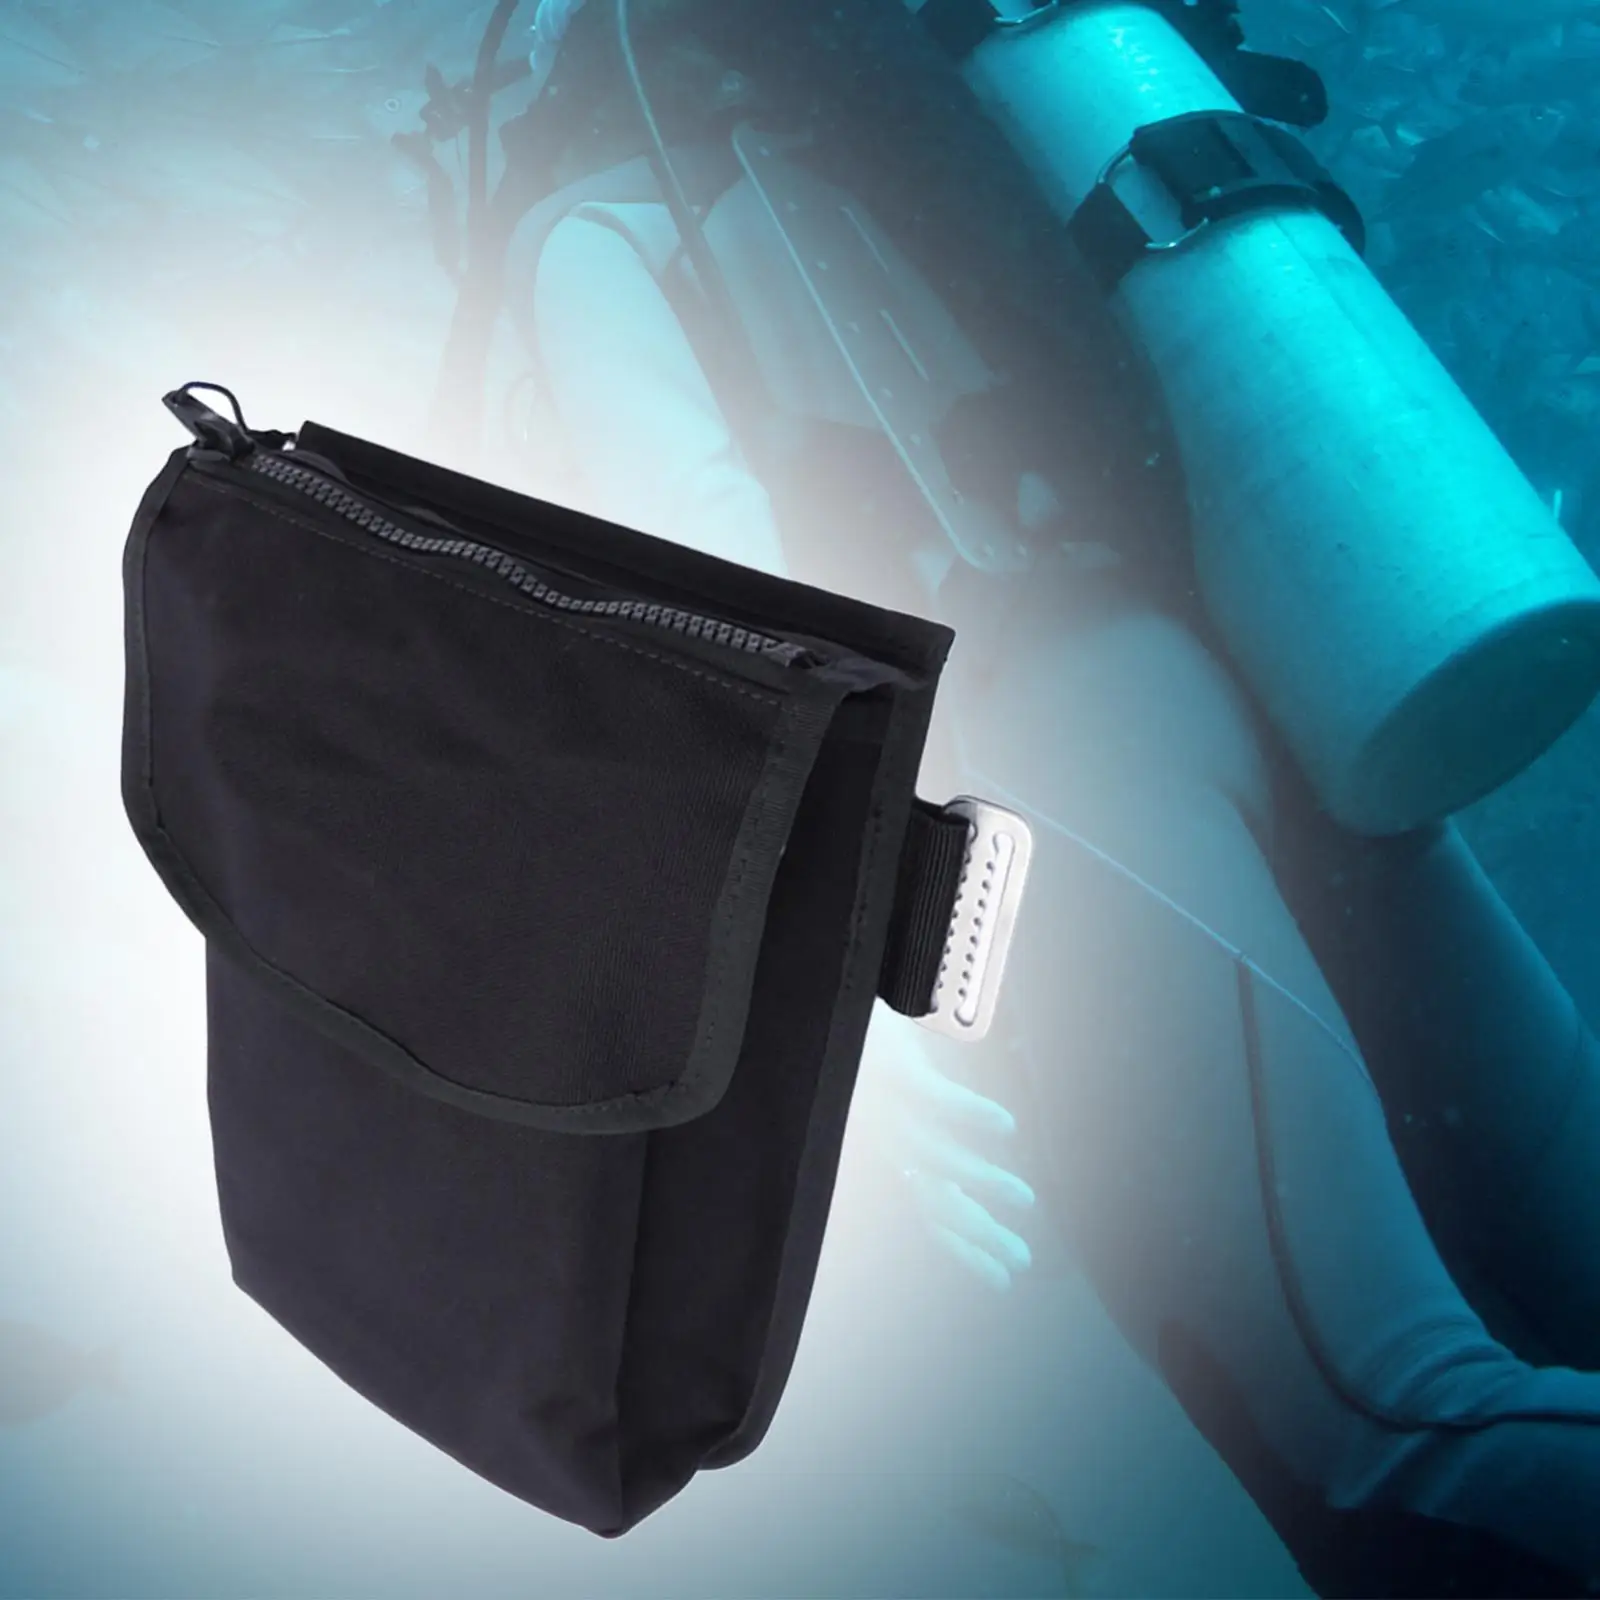 Scuba Diving Thigh Pocket Snorkeling Equipment Holder Scuba Diving Accessories for Underwater Diver Snorkeling Swimming Black